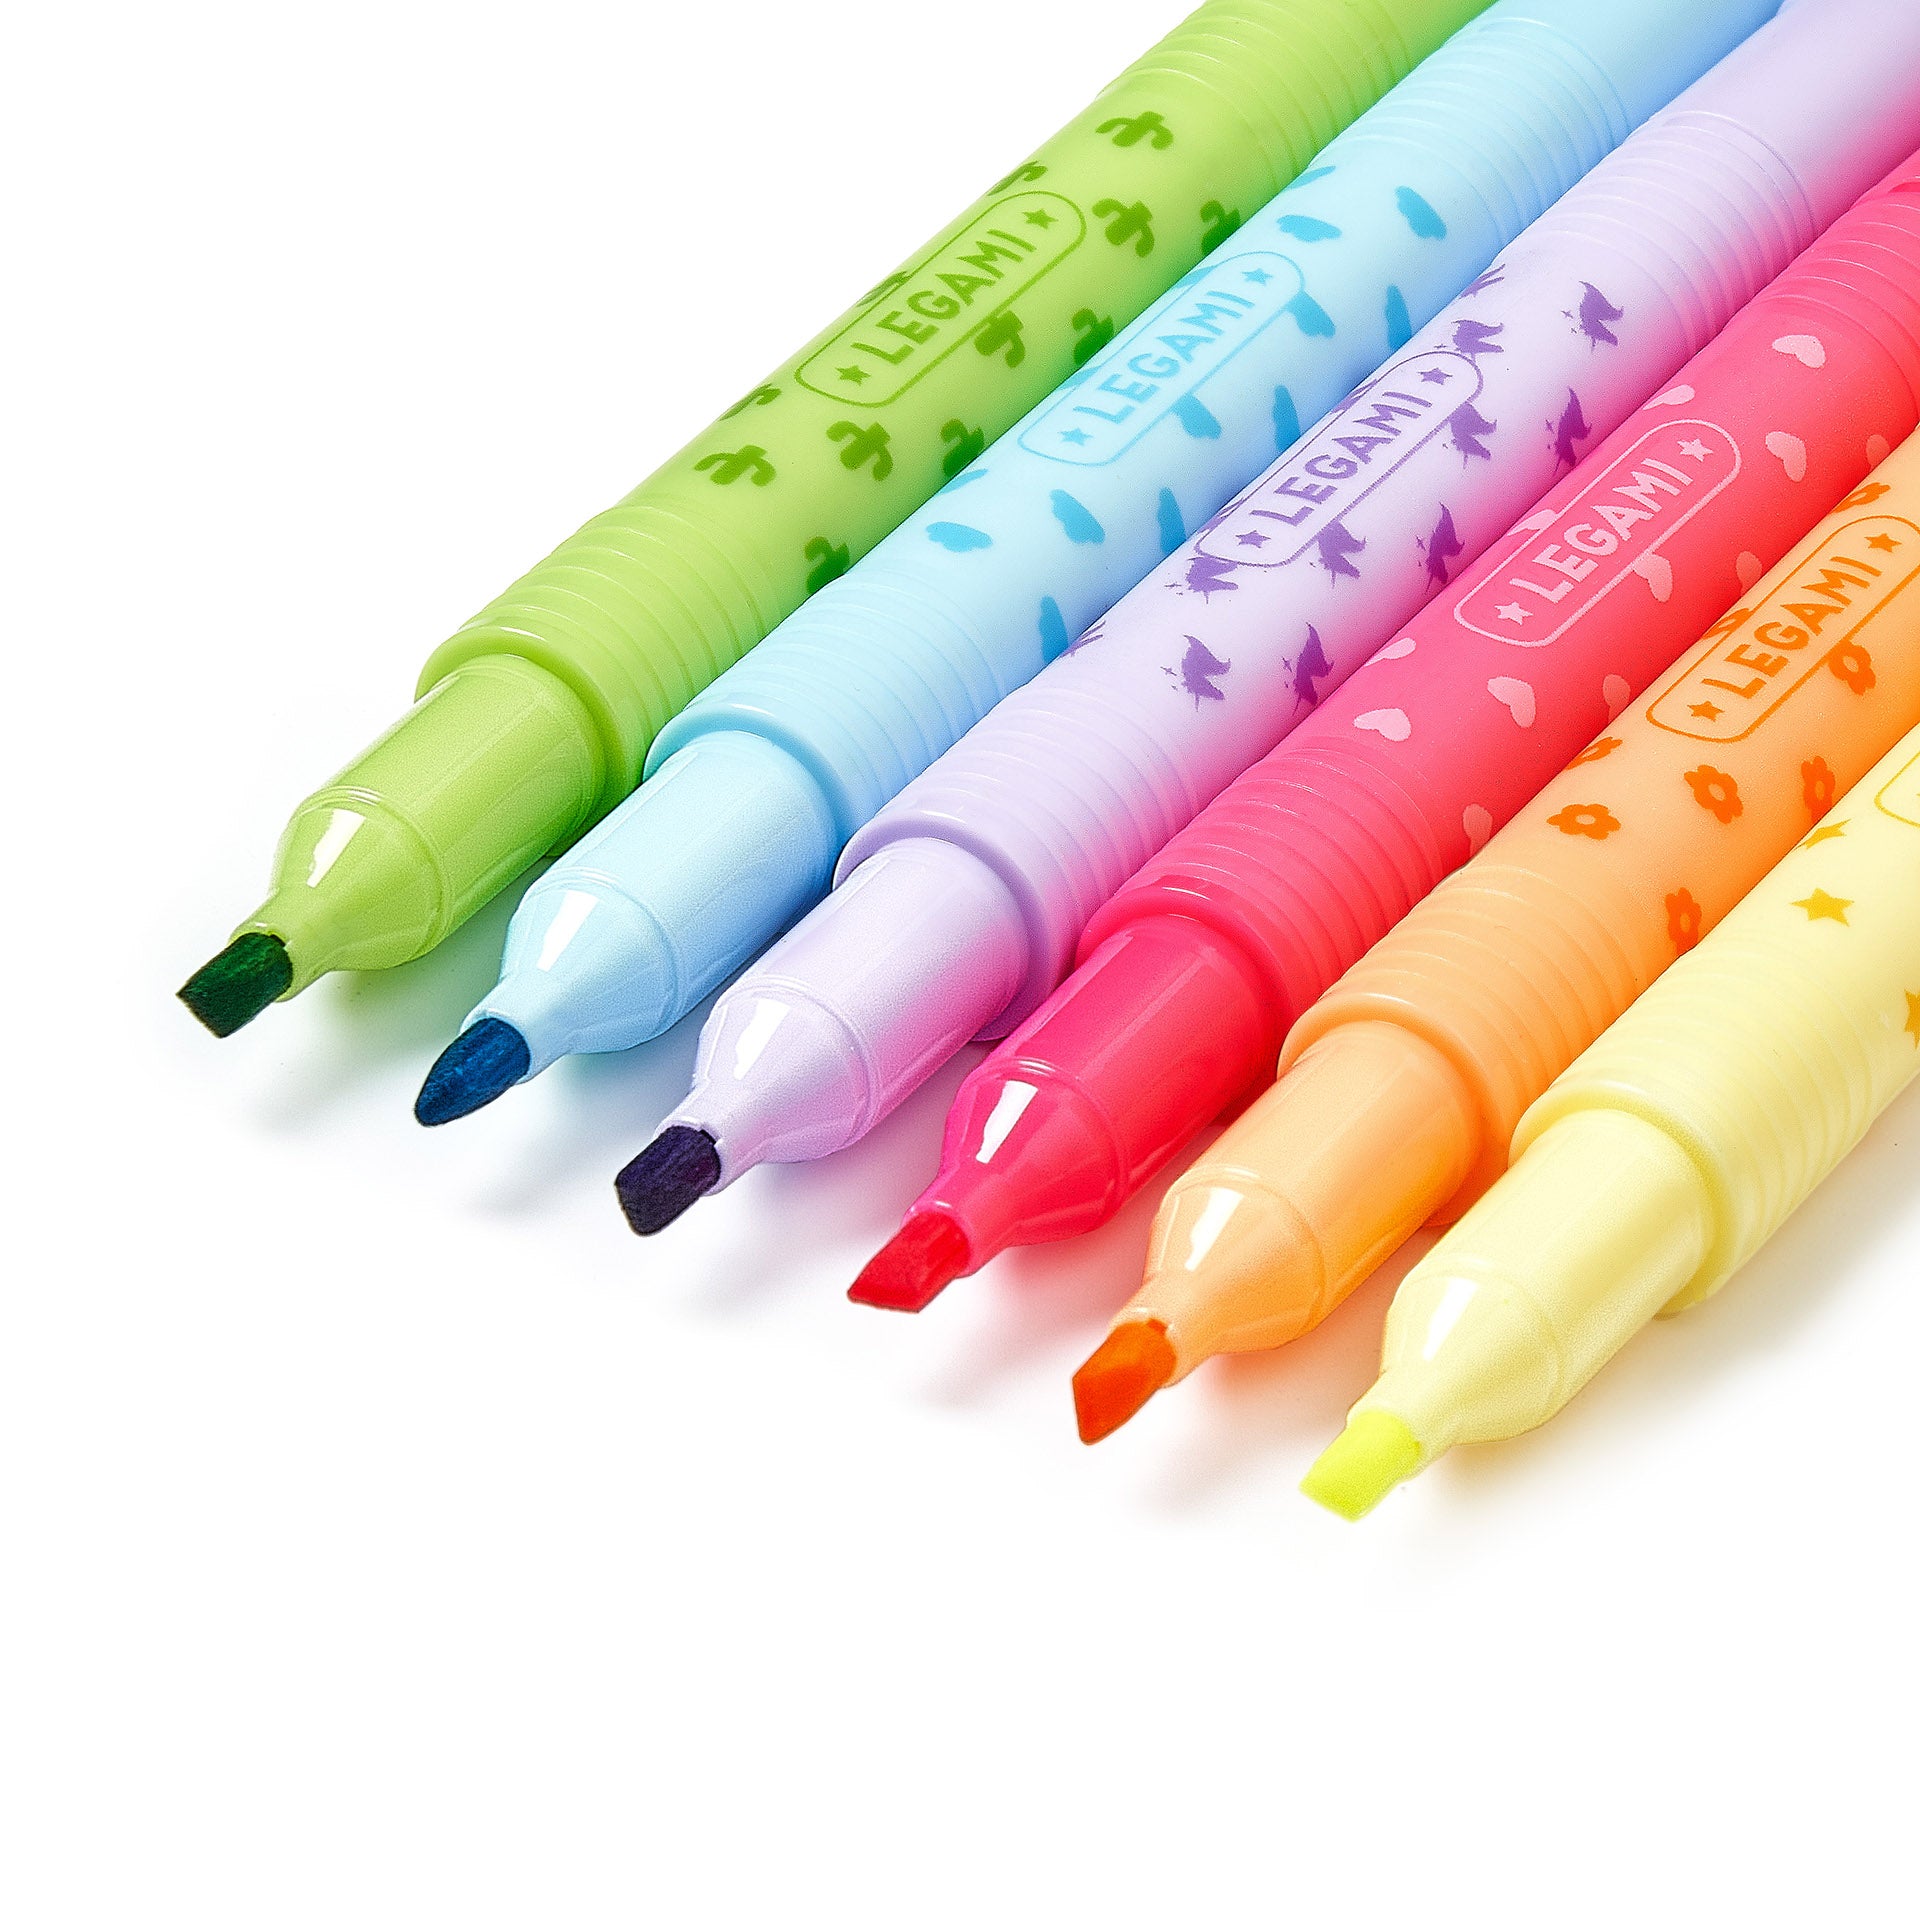 An image of 6 mini erasable highlighters with their lids off. They are all single colours - green, light blue, lilac, red, orange and yellow.